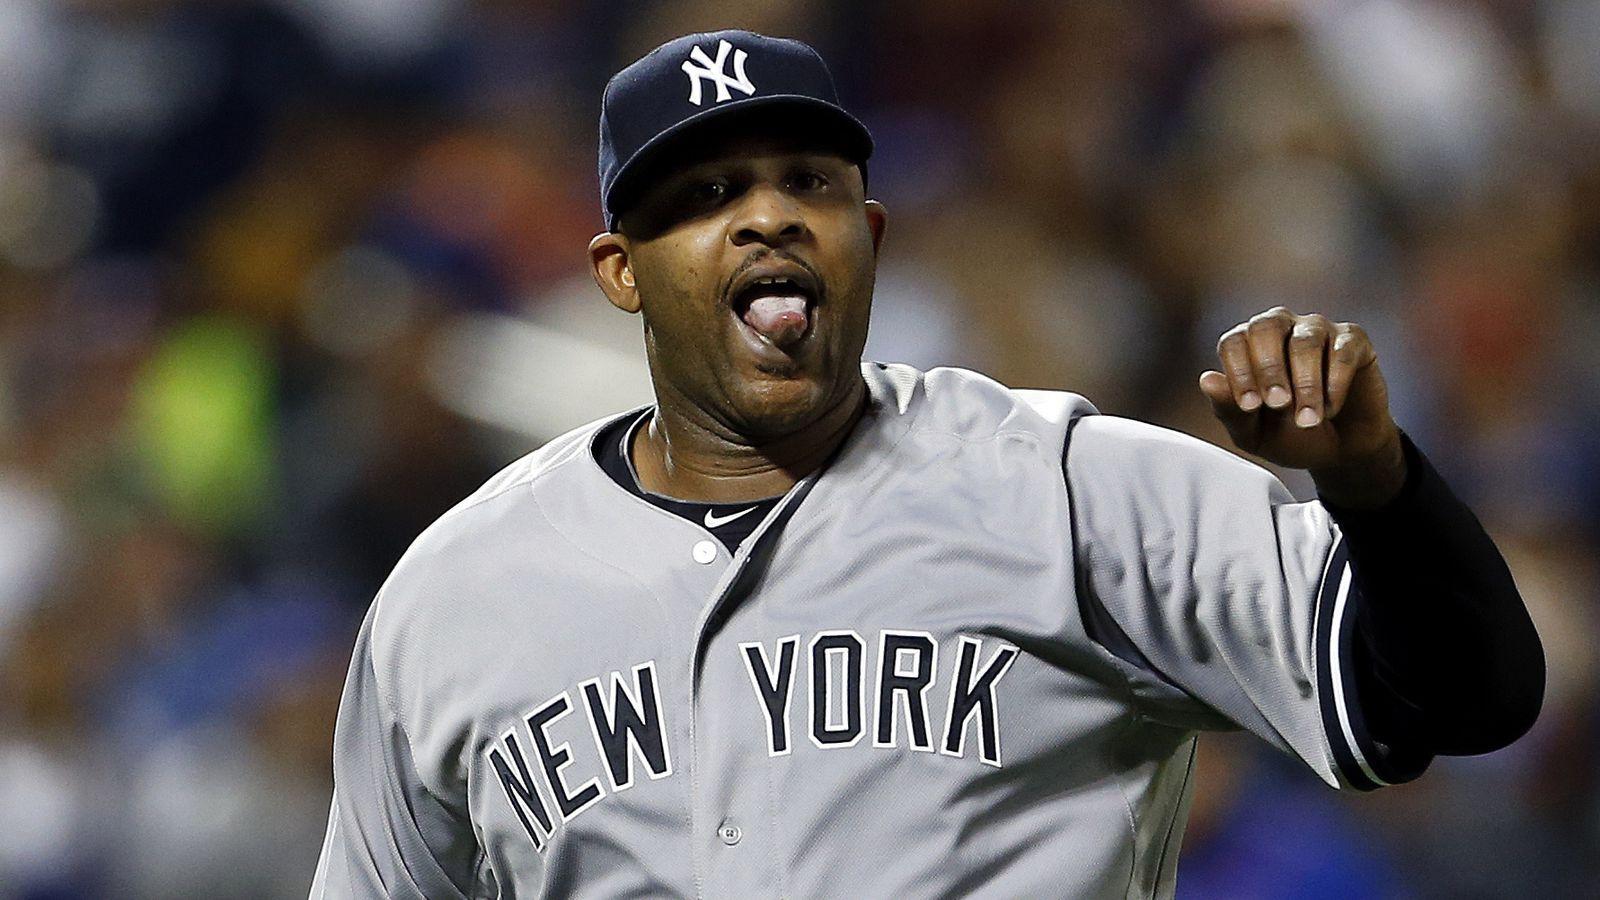 Yankees Mets 2: CC Sabathia and the offense shine in Subway